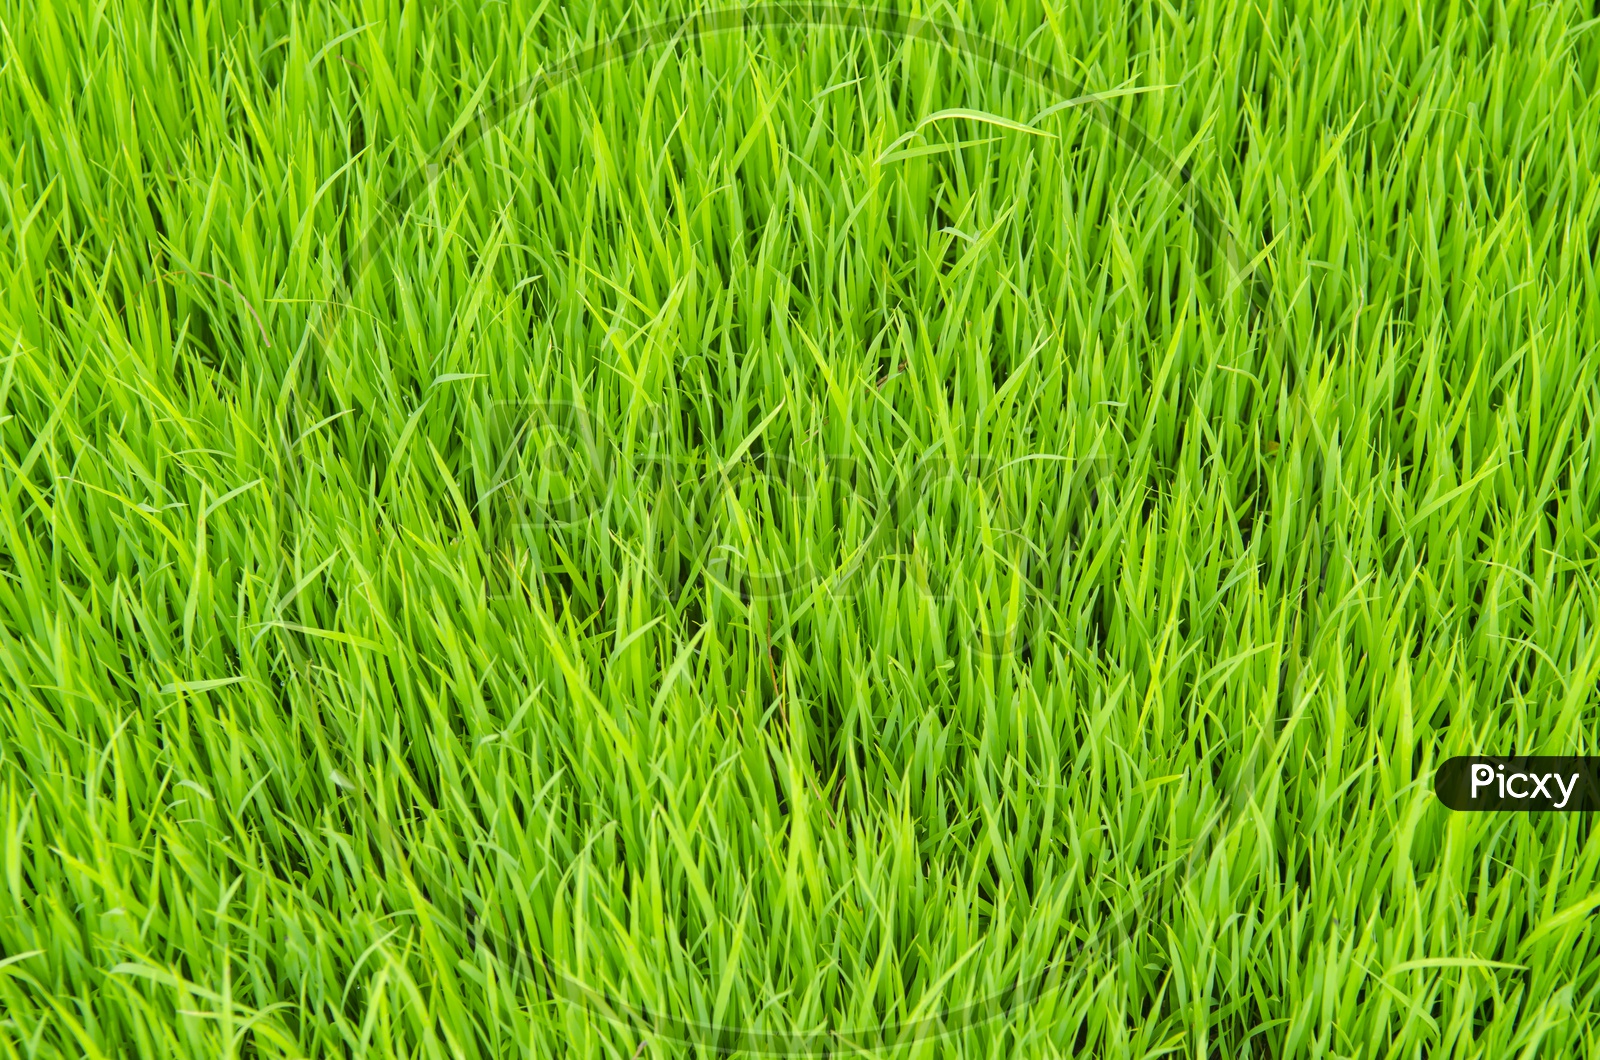 green paddy or Rice field